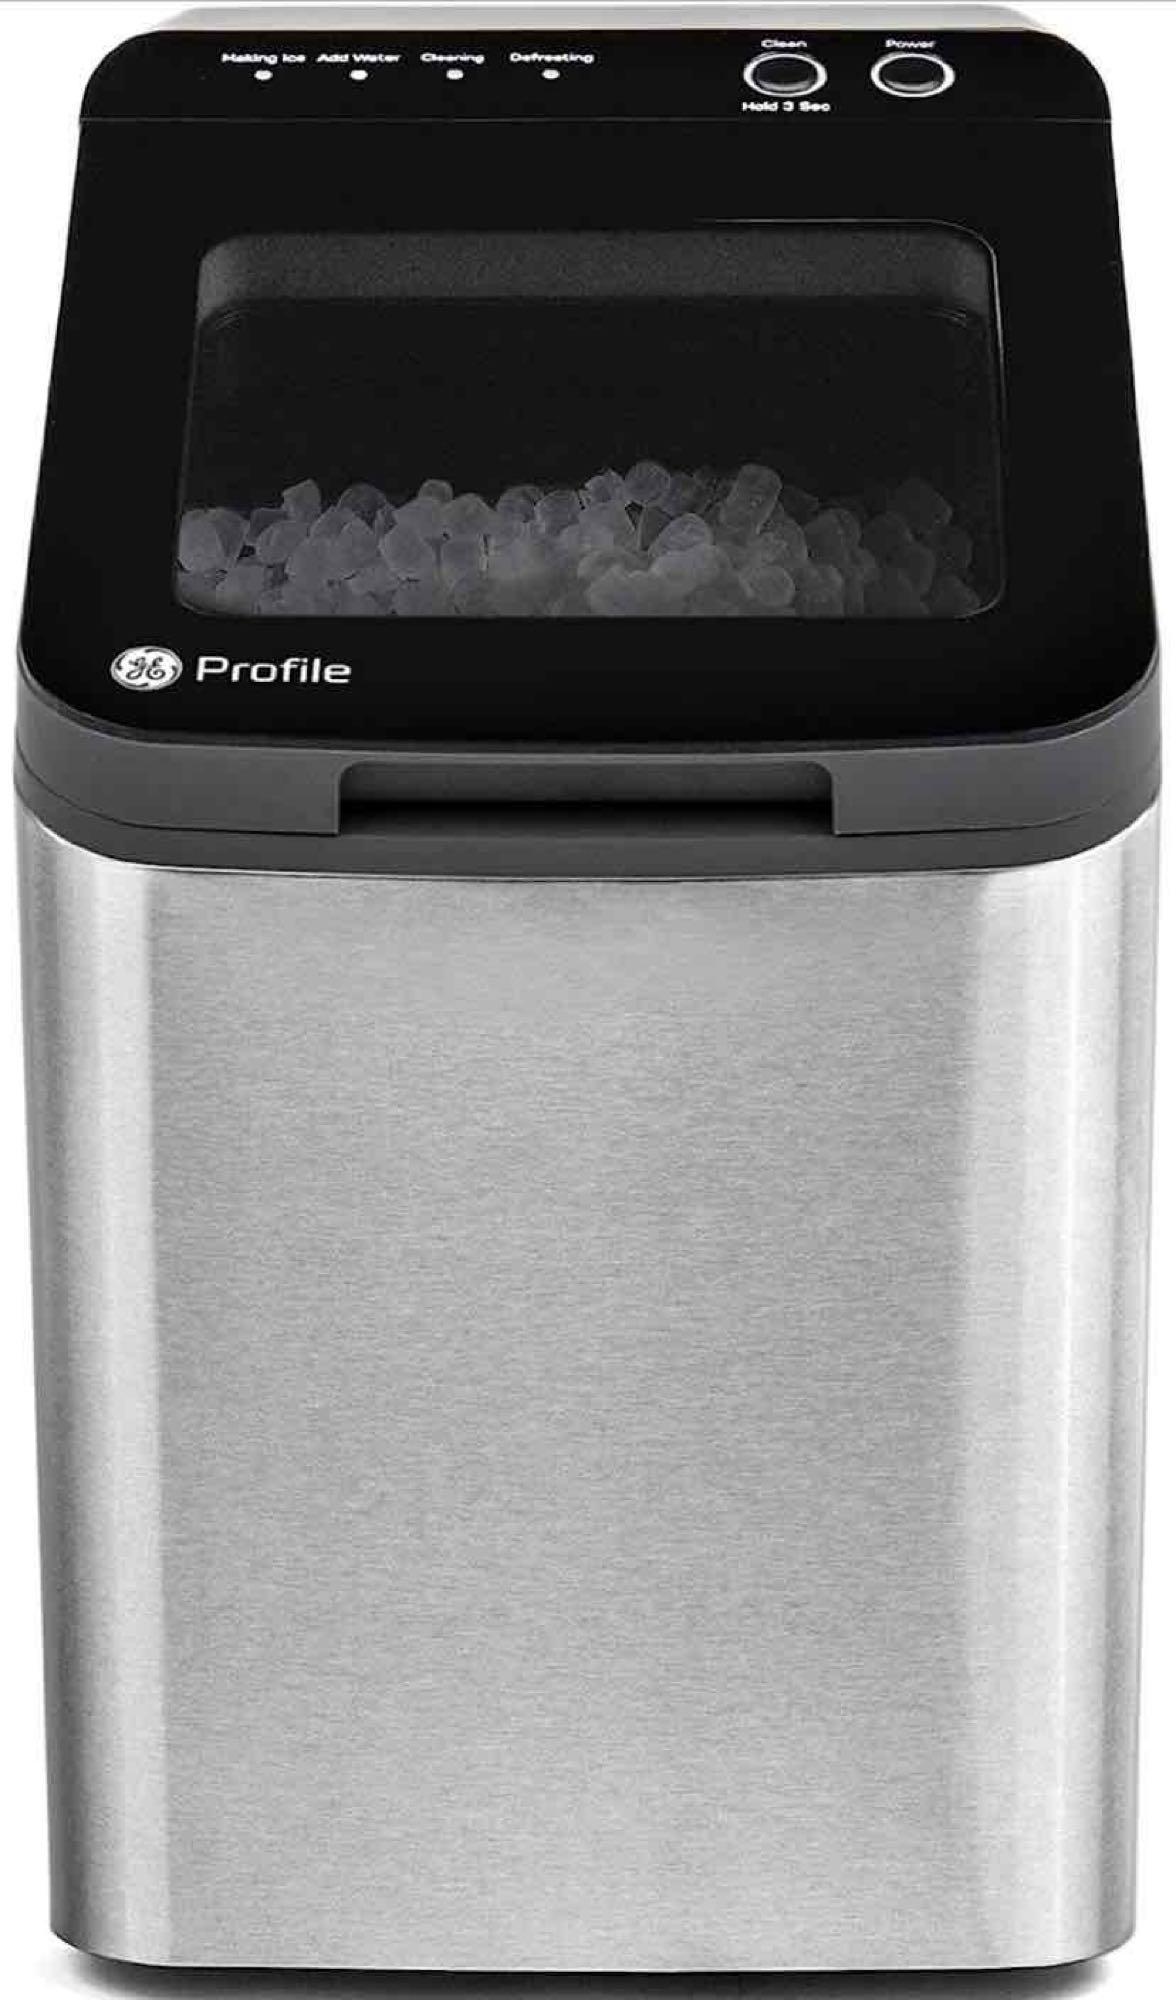 GE Profile Opal 1.0 Nugget Ice Maker| Countertop Pebble Ice Maker | Portable Ice Machine Makes up to